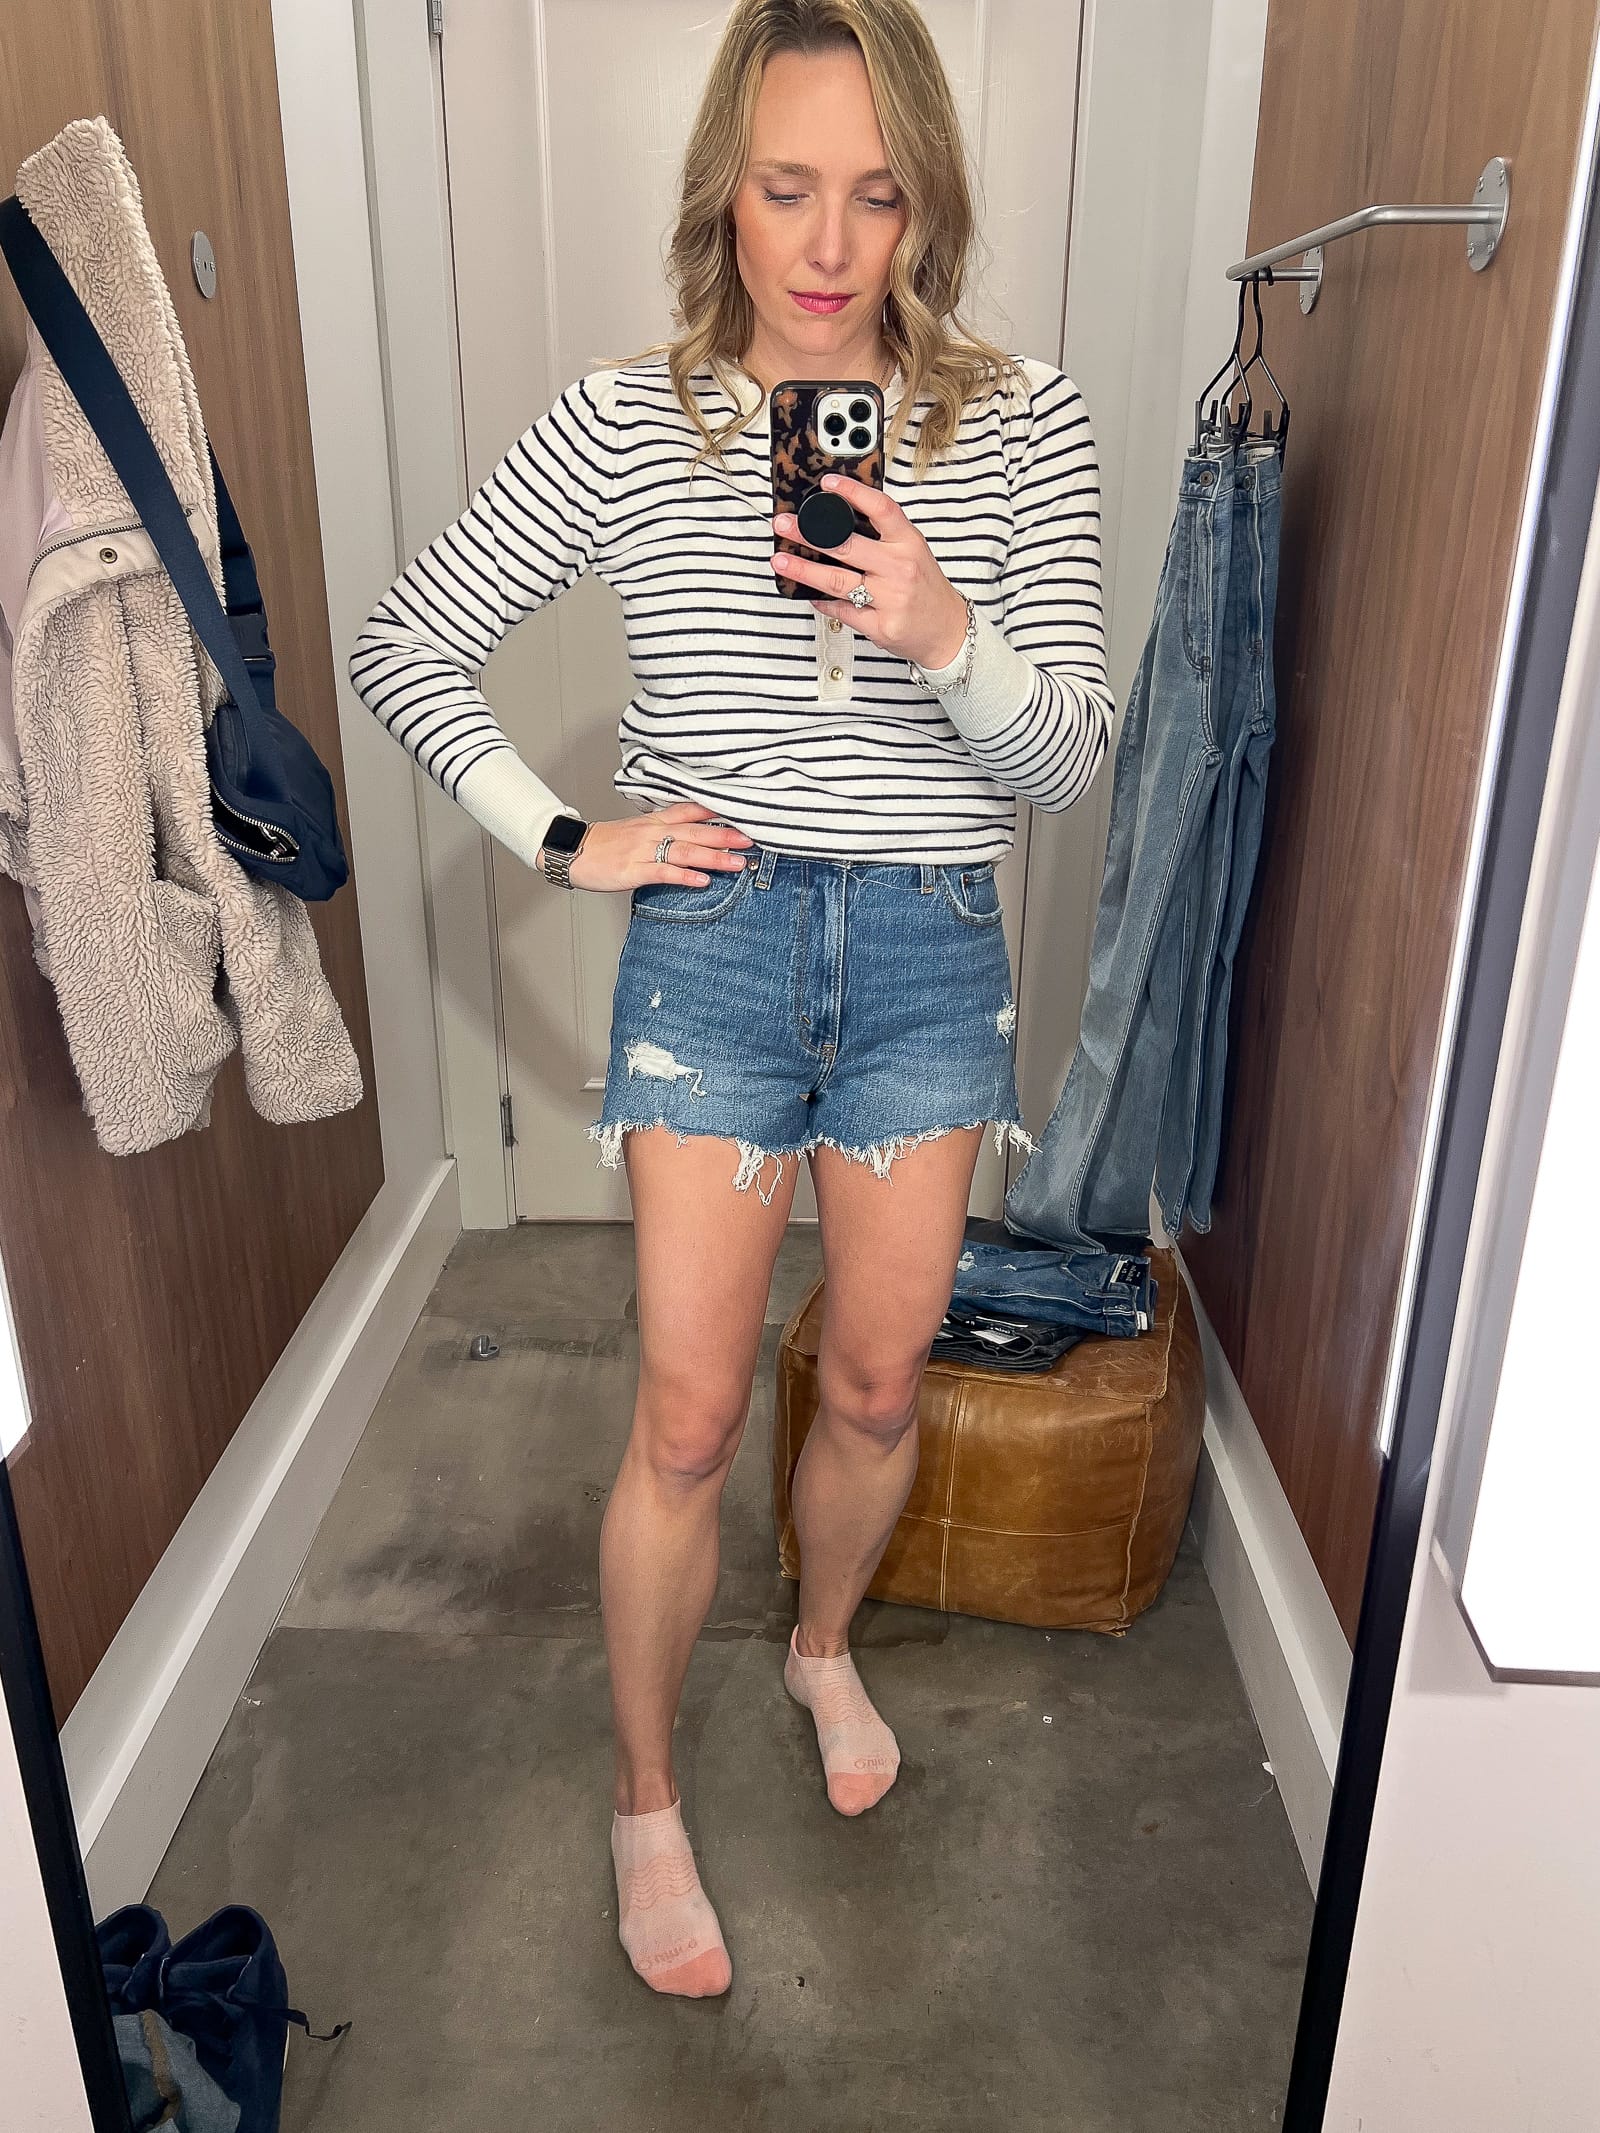 The mom short from abercrombie and fitch review